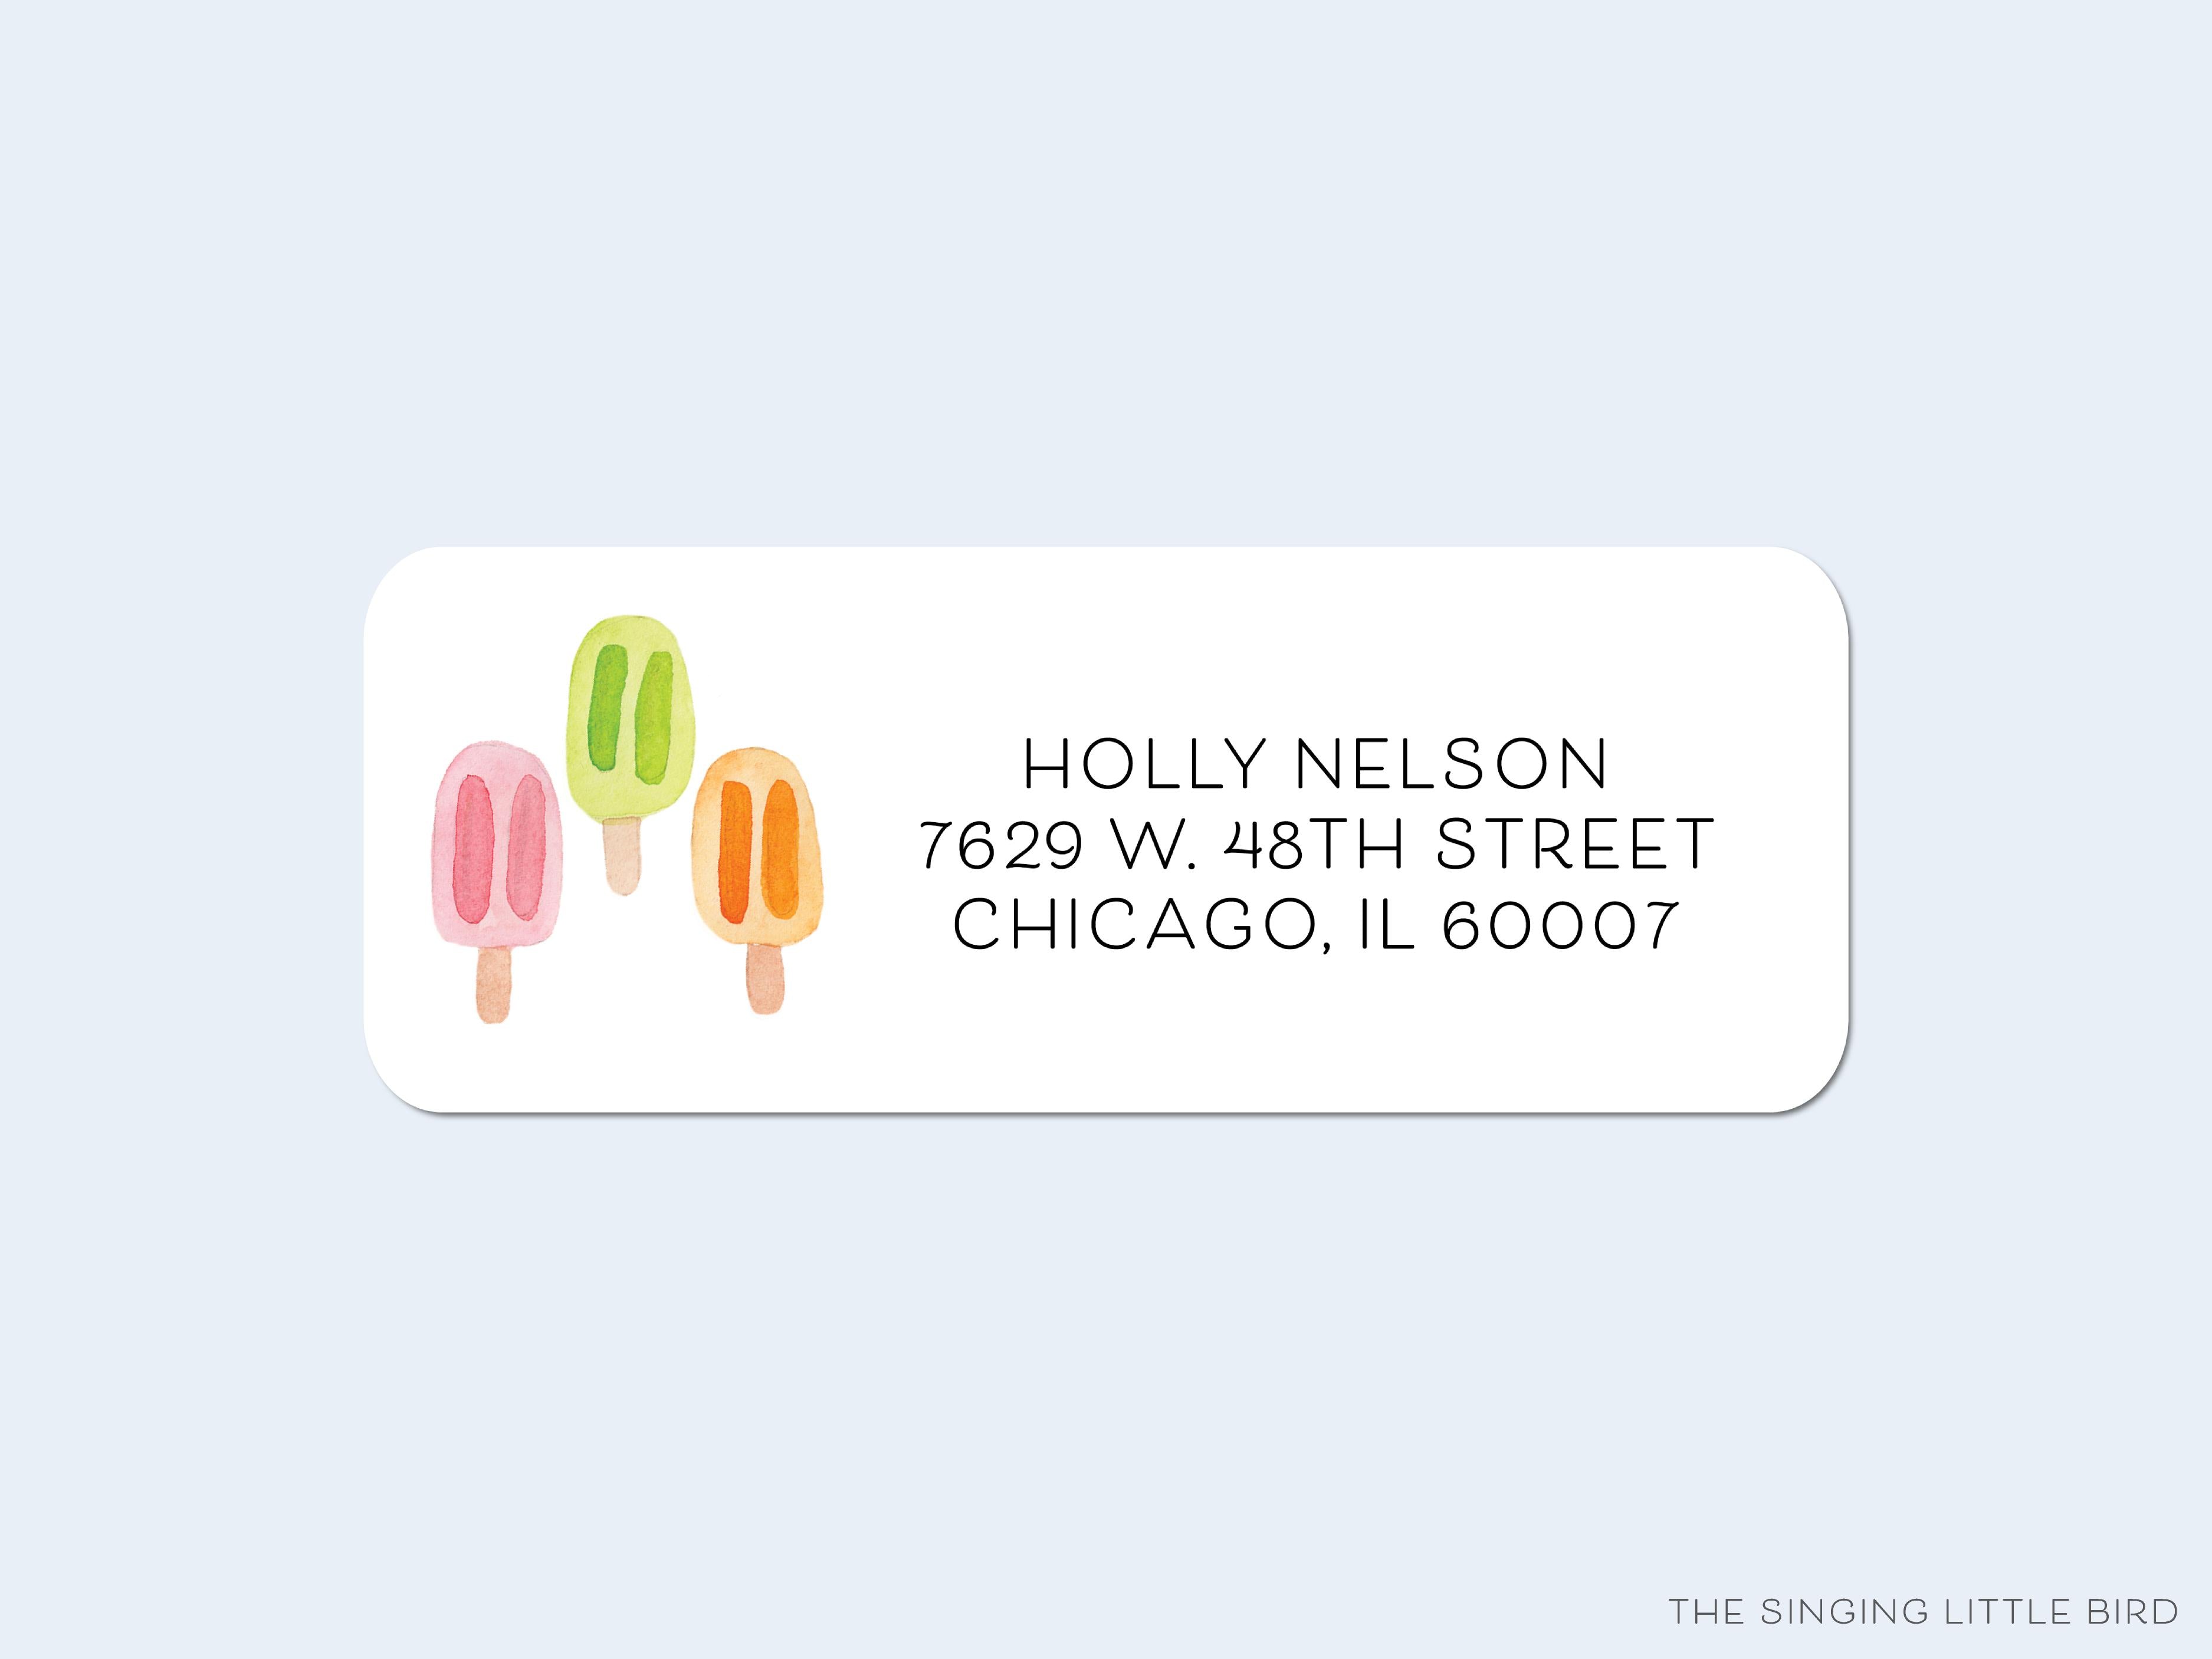 Popsicle Trio Return Address Labels-These personalized return address labels are 2.625" x 1" and feature our hand-painted watercolor Popsicles, printed in the USA on beautiful matte finish labels. These make great gifts for yourself or the frozen treat lover.-The Singing Little Bird